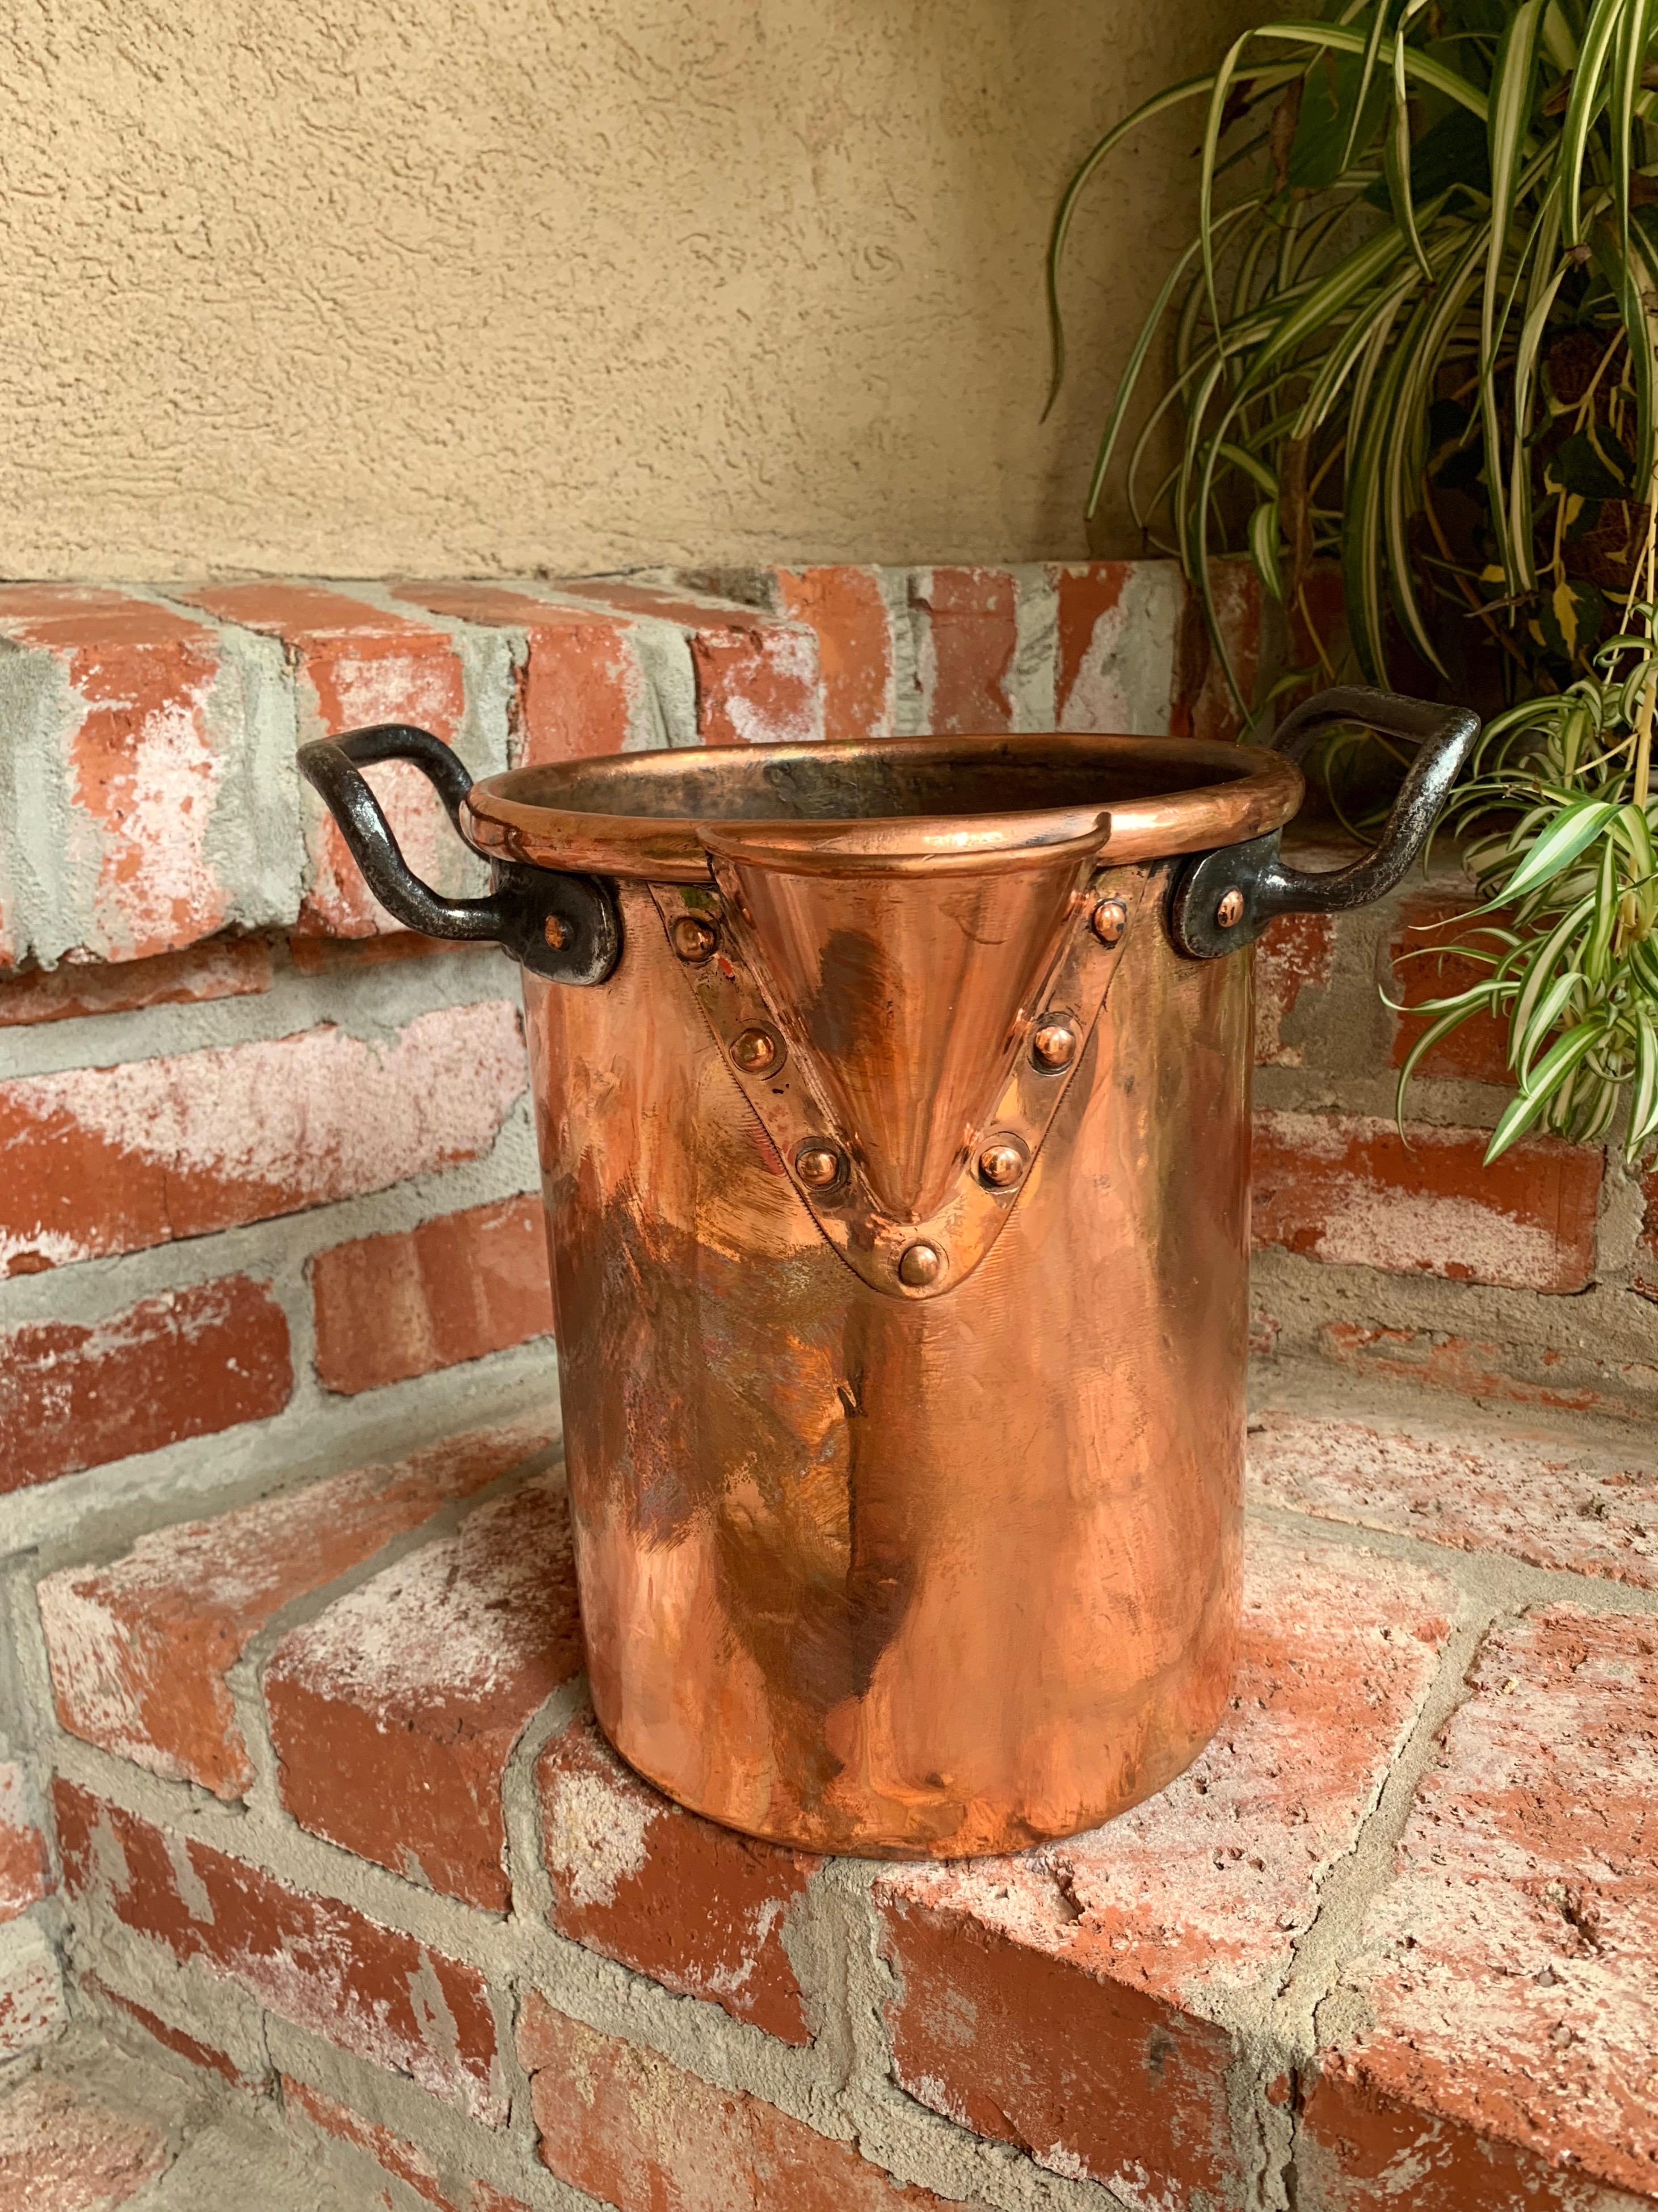 Antique French copper vessel pot Riveted wine champagne bucket 19th century
 
~Direct from France~
~Beautiful antique French copper vessel with spout and handles, and perfect for a wine/champagne bucket!~
~Tall cylinder with large shaped copper